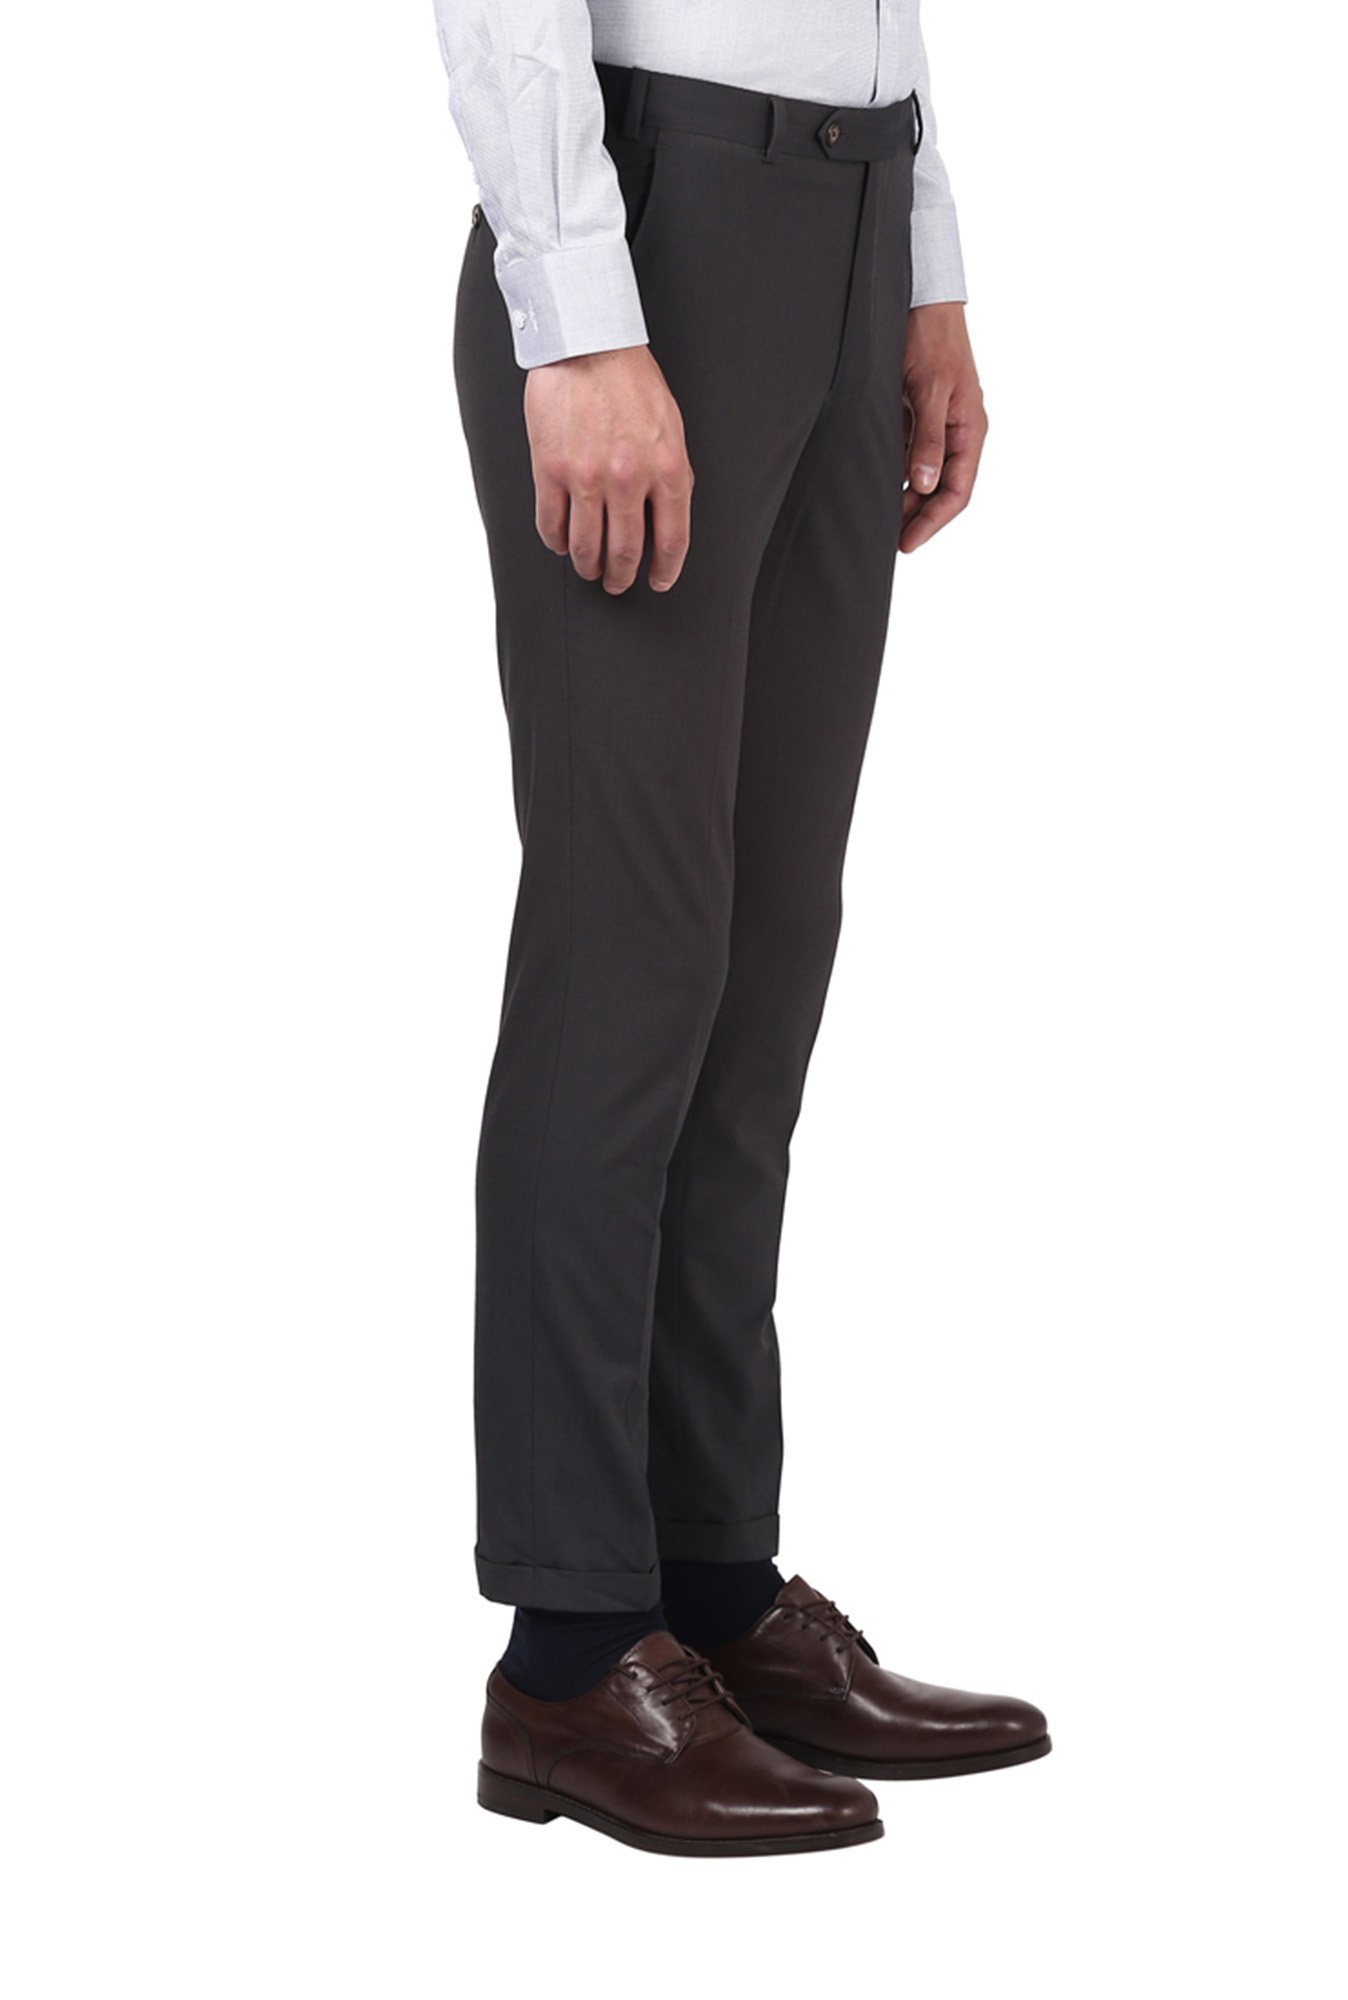 Slim fit work pants, removable pockets, HD model, size XXL/56, NEO - EVOLD